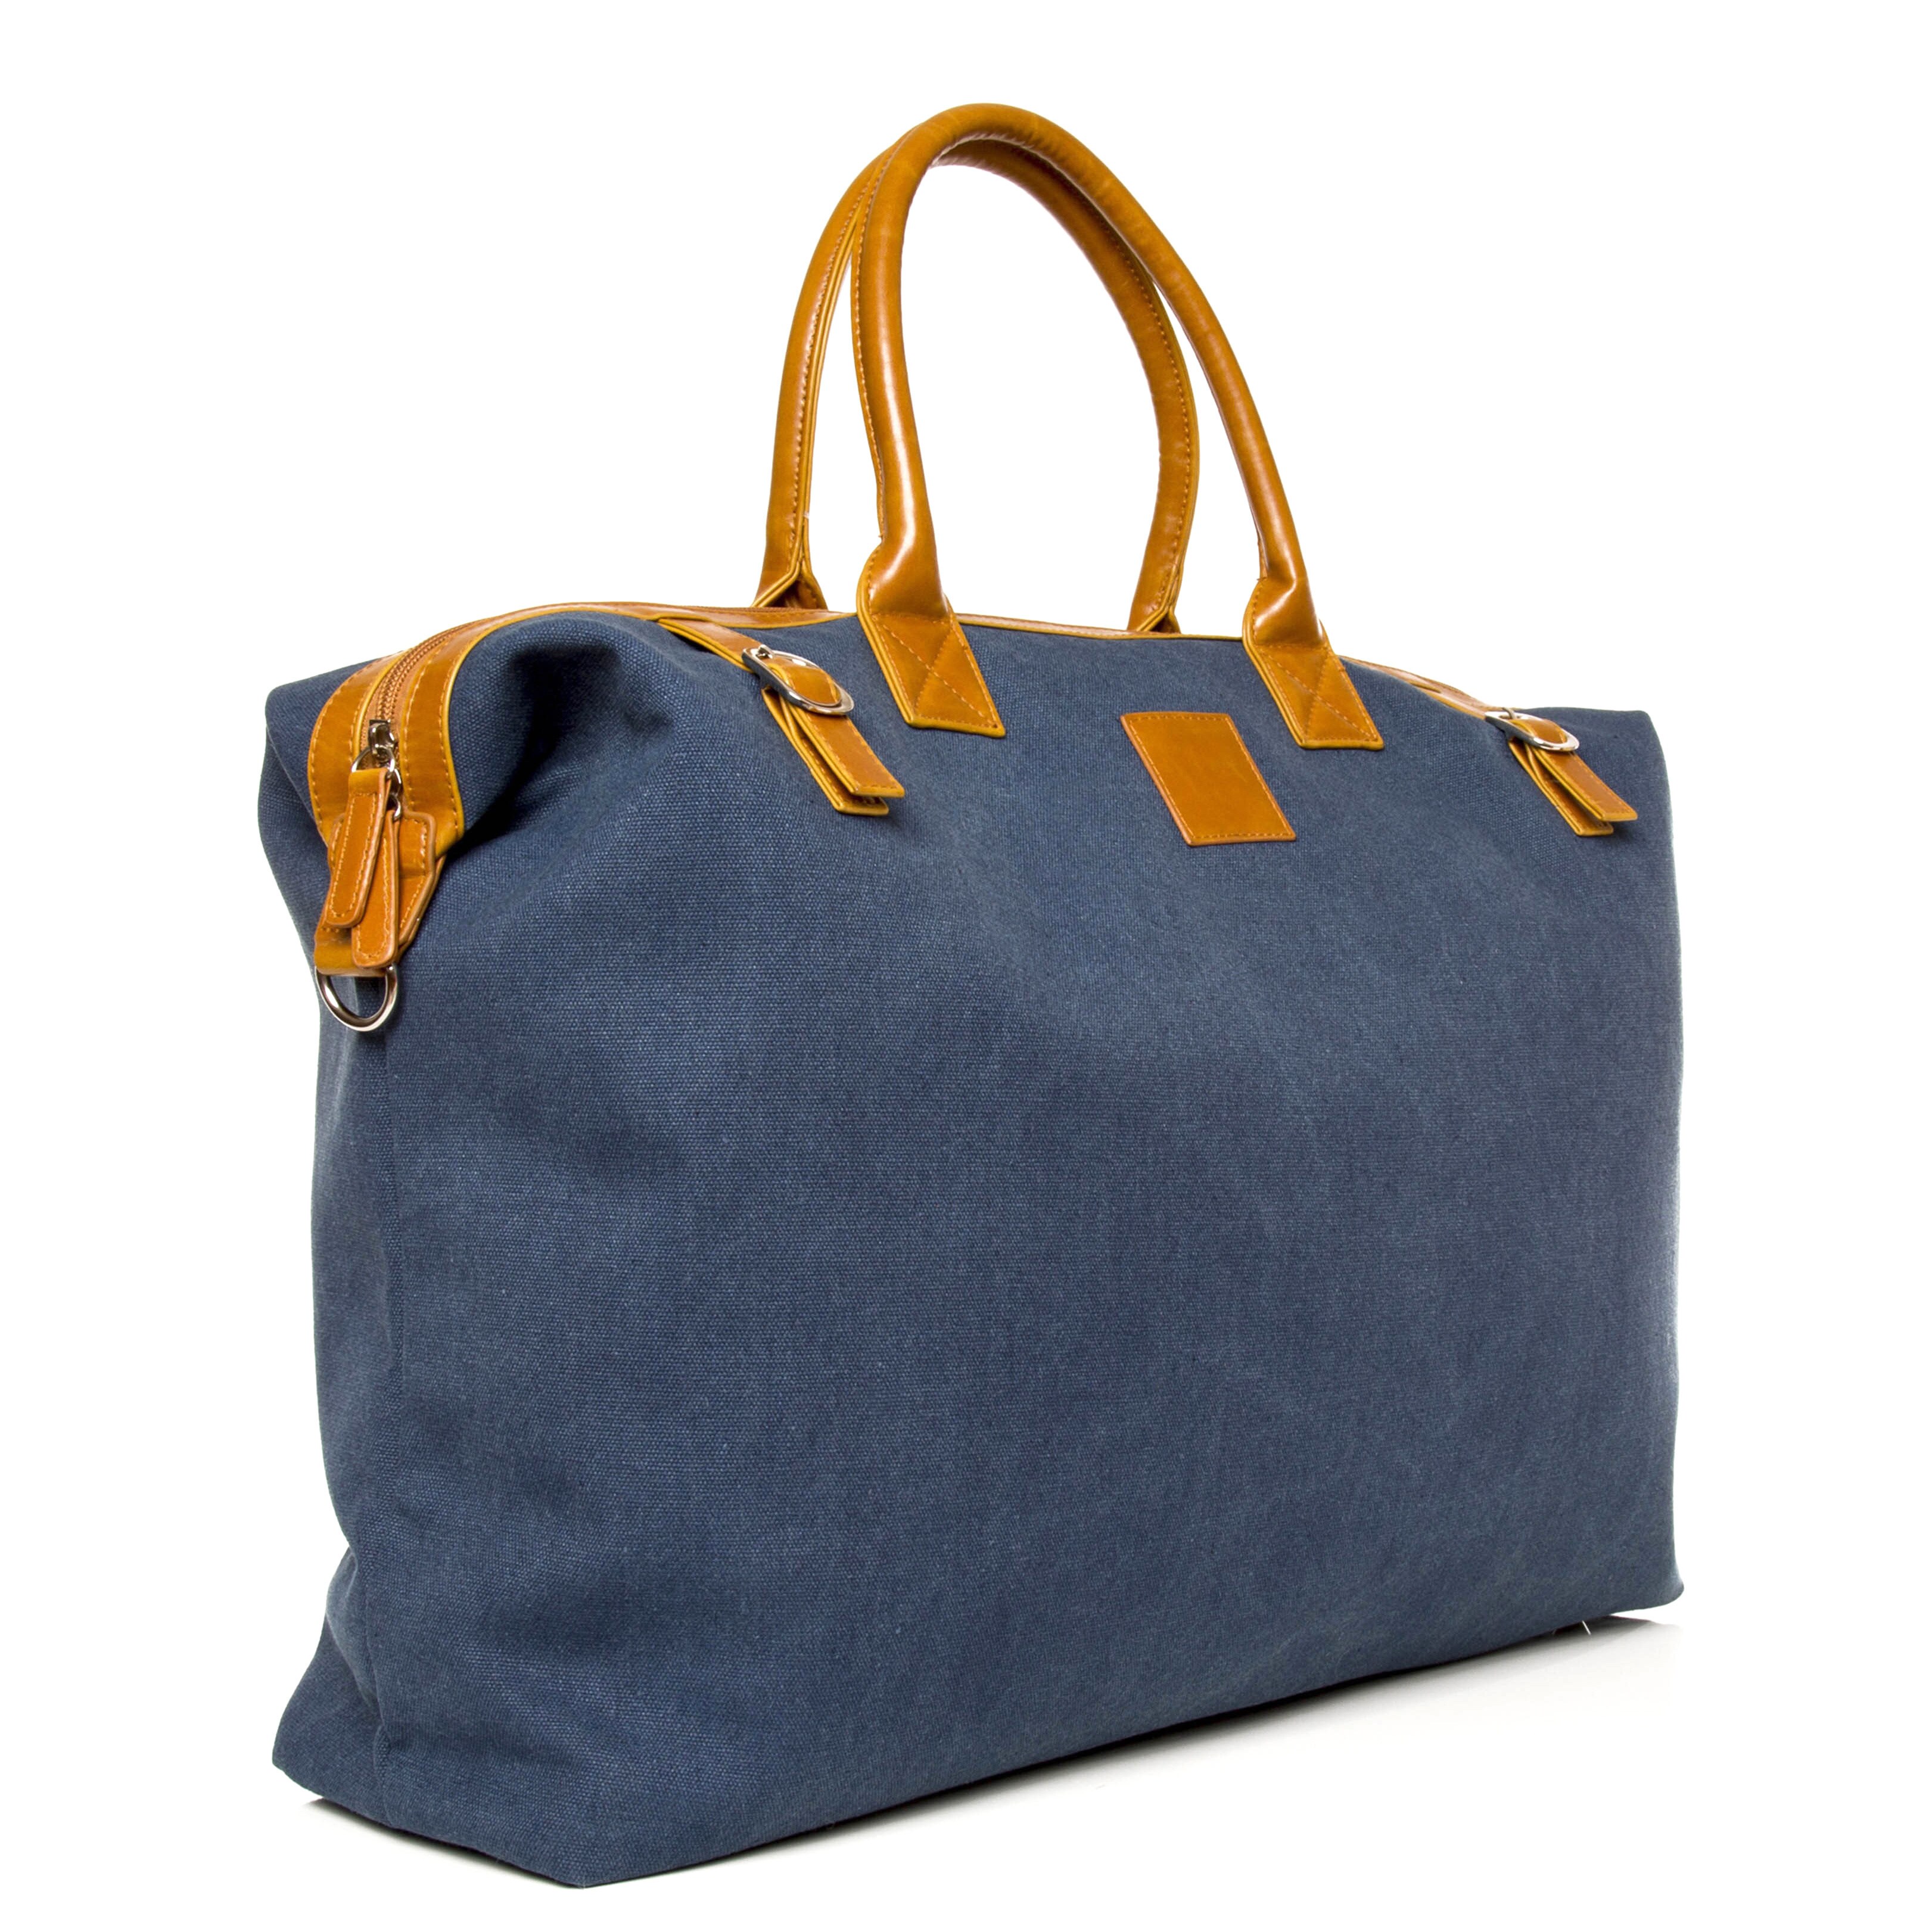 Shop The Weekender Bag - Free Shipping Today - Overstock - 10354950